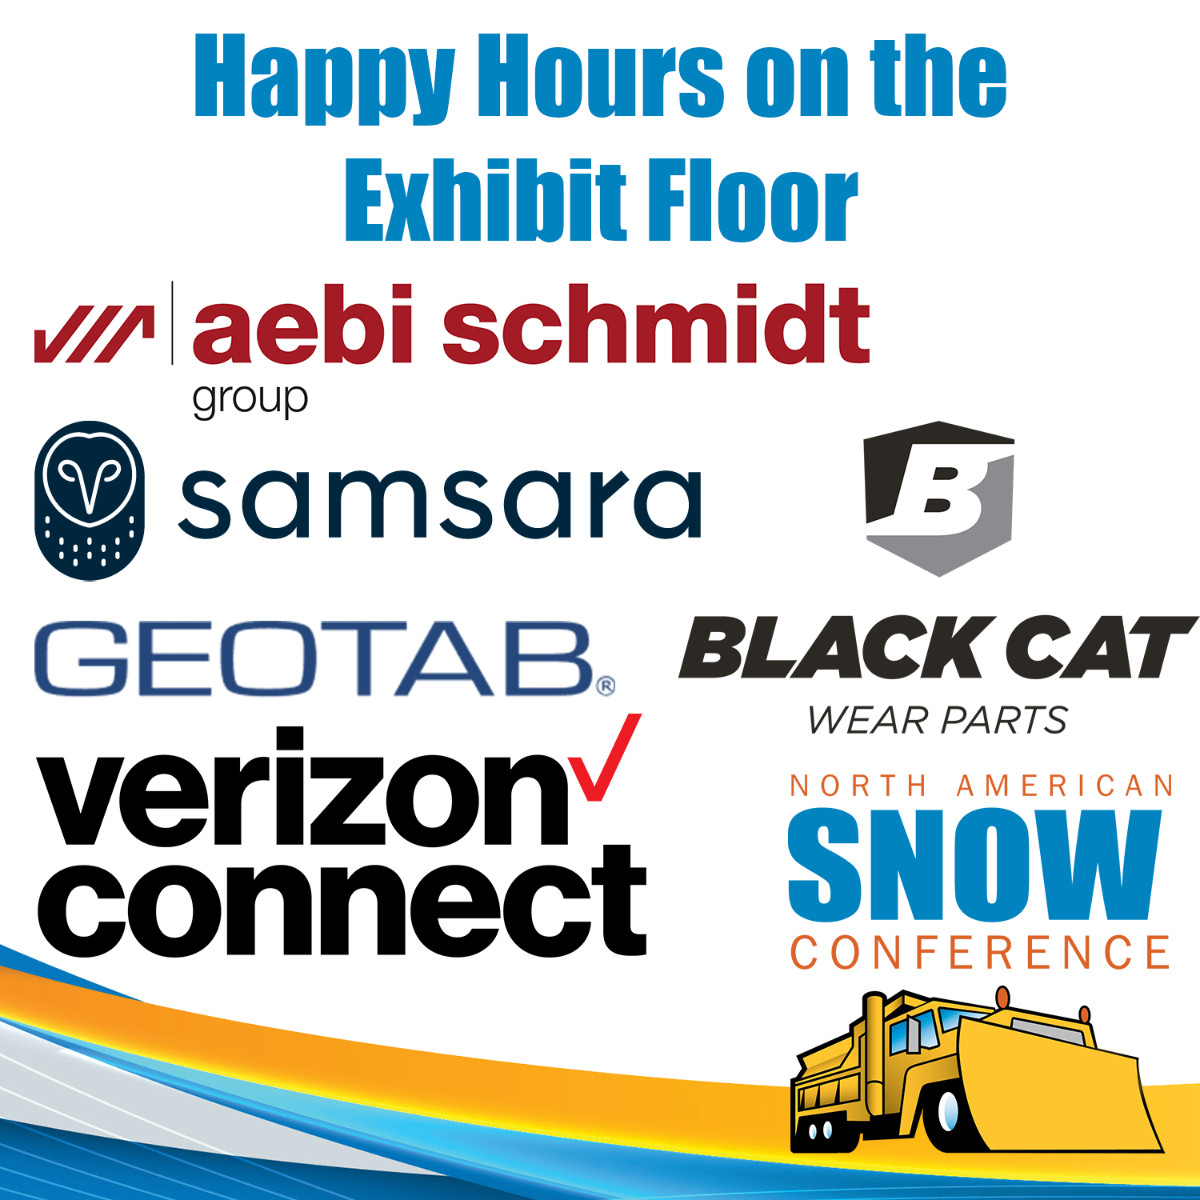 #sponsored | We have tons of popup happy hours on the show floor today! Check in with our pals Aebi-Schgmidt Group (booth #529), Geotab (booth #835), Black Cat Wear Parts (booth #705), Verizon Connect (booth #924), and Samsara (booth #737) between 12 and 3:30 for a cool drink.